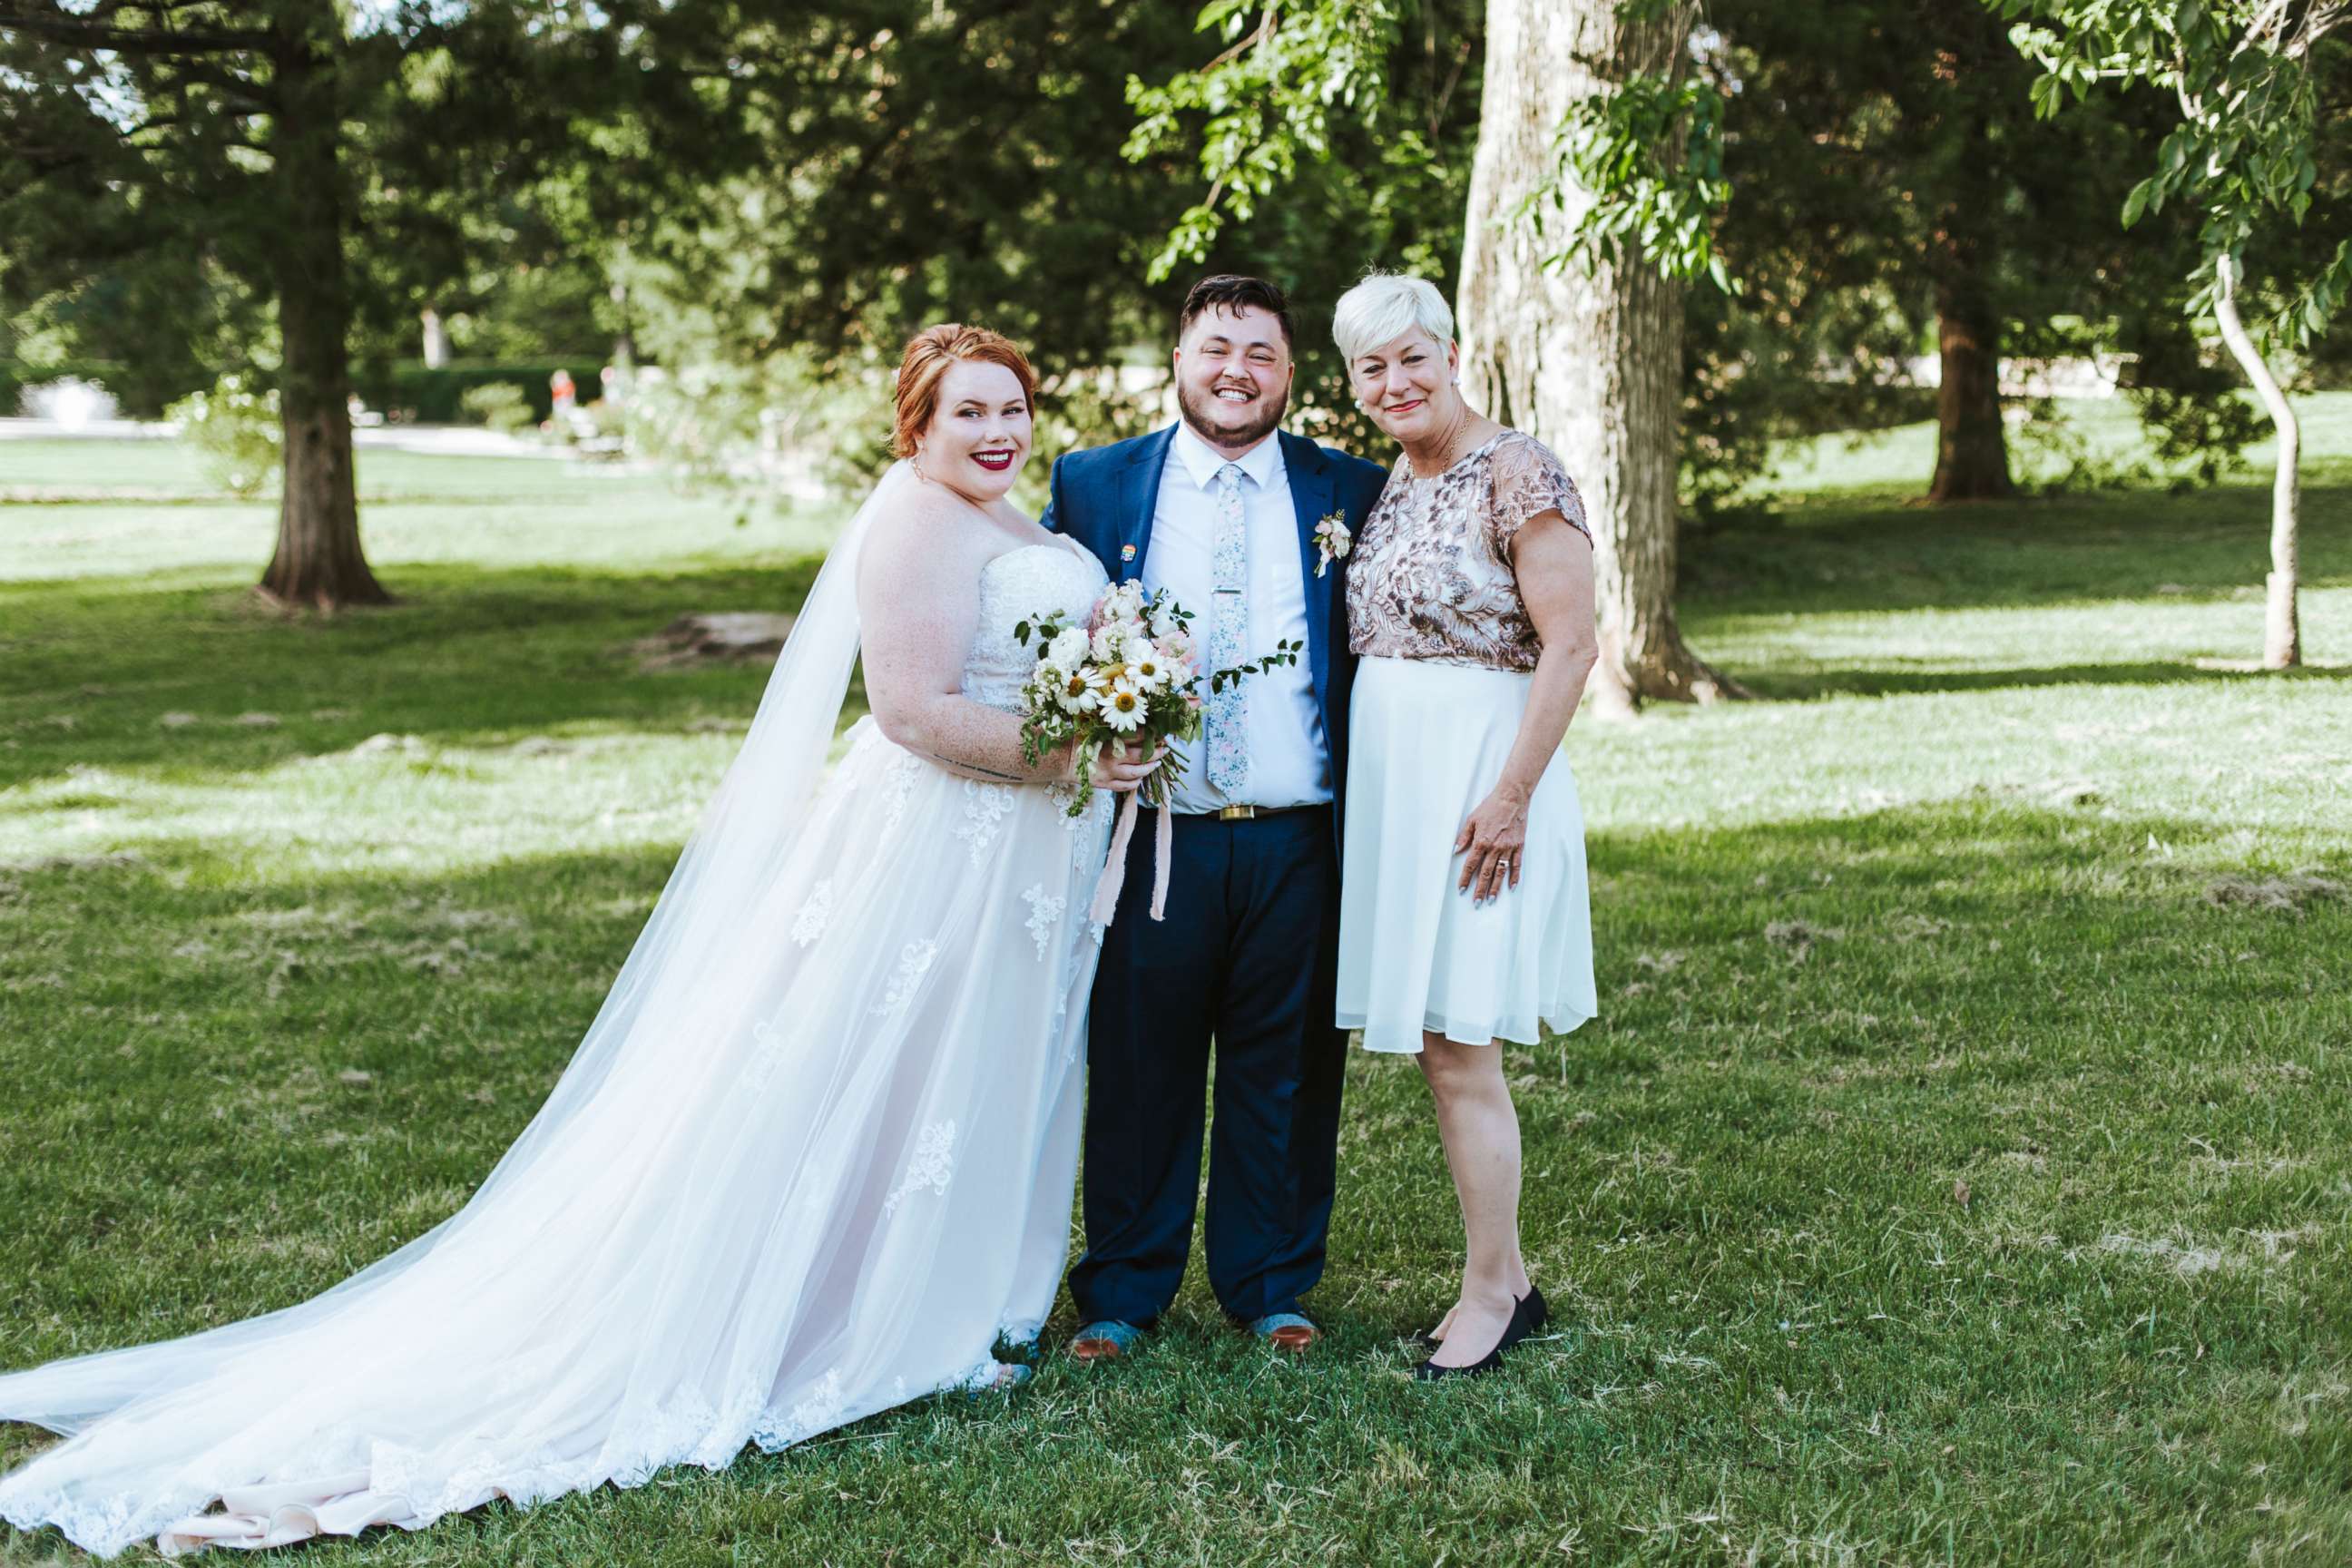 PHOTO: Sara Cunningham of Oklahoma City, Oklahoma, stood in at Sam and Haley Hedrick's wedding on June 2, 2019, as a support system for the couple on their big day.